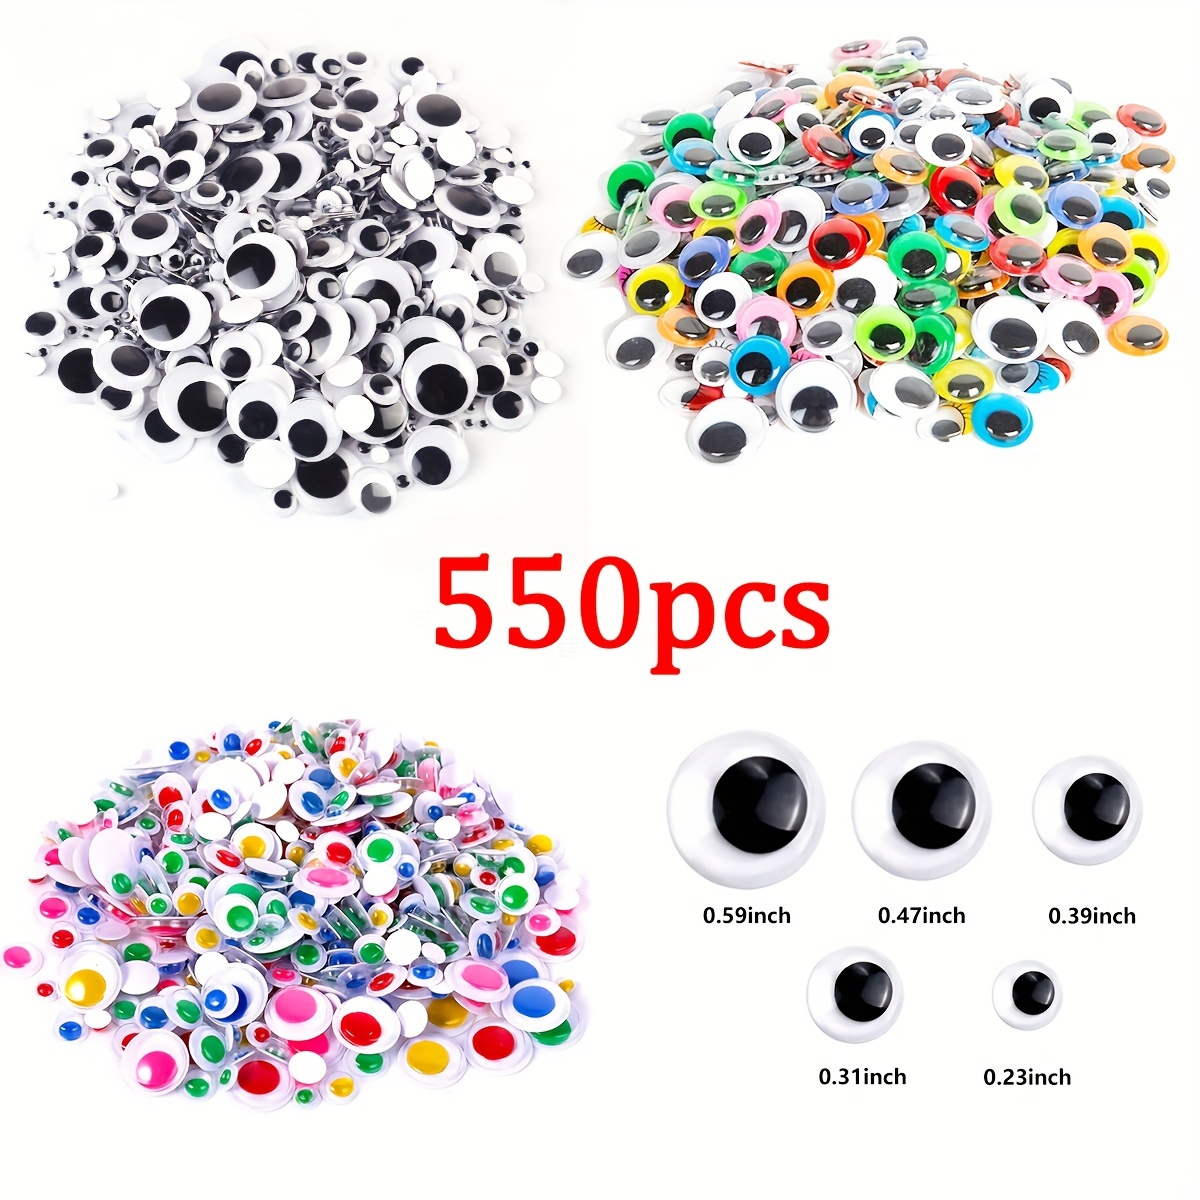 

550pcs Googly Eyes Self Adhesive For Crafts, Craft Sticker Wiggle Eyes With Multi Colored And Sizes For Diy (mixed Sizes)